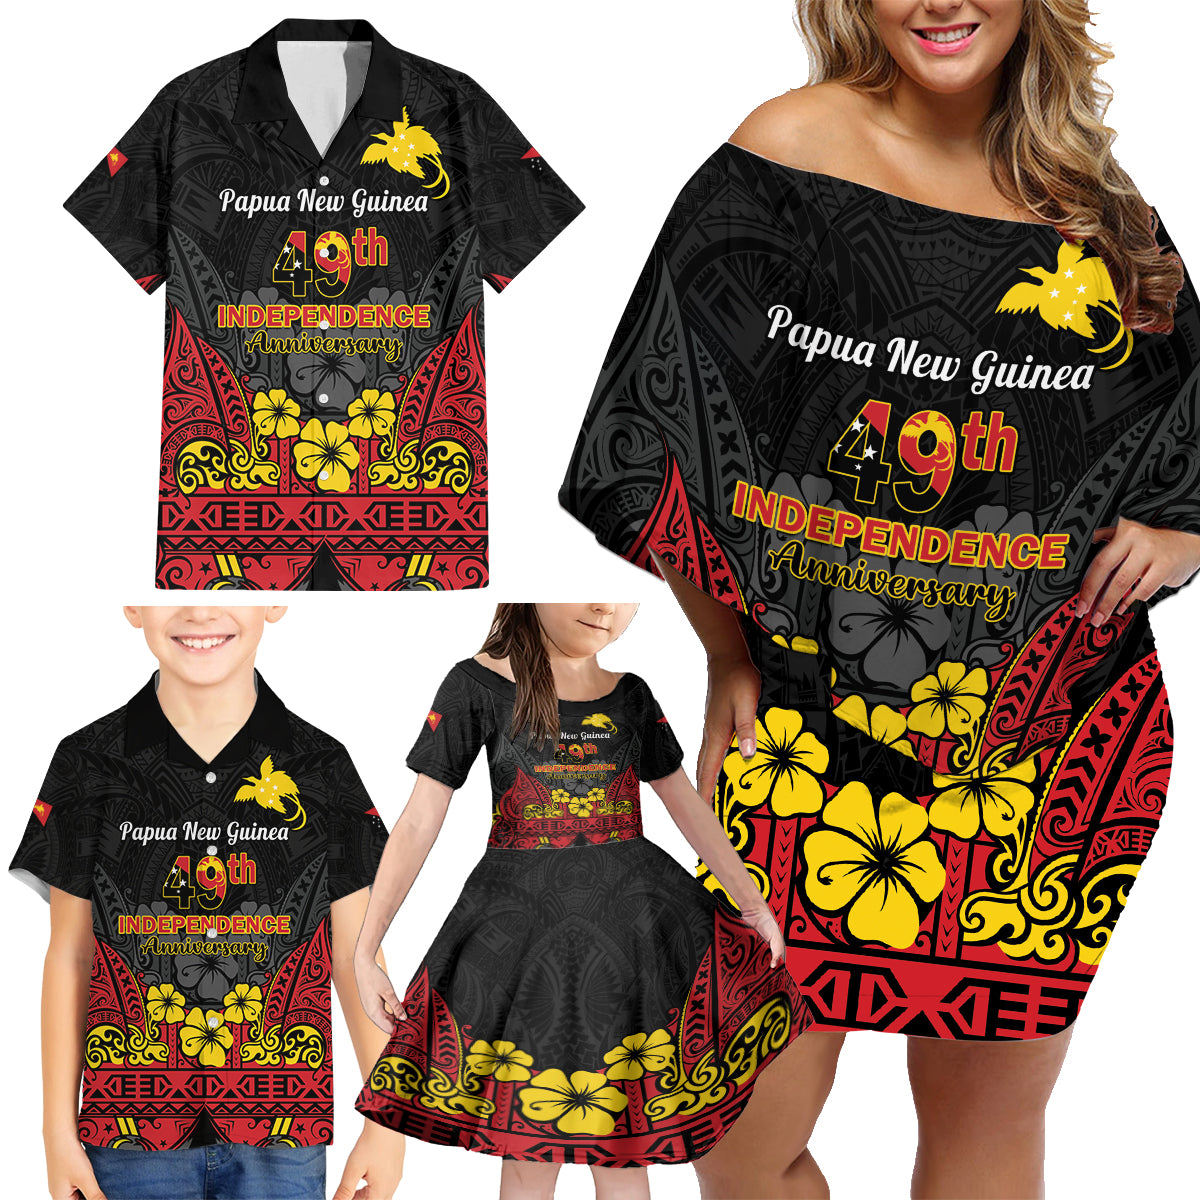 Papua New Guinea Independence Day Family Matching Off Shoulder Short Dress and Hawaiian Shirt PNG Bird of Paradise 49th Anniversary